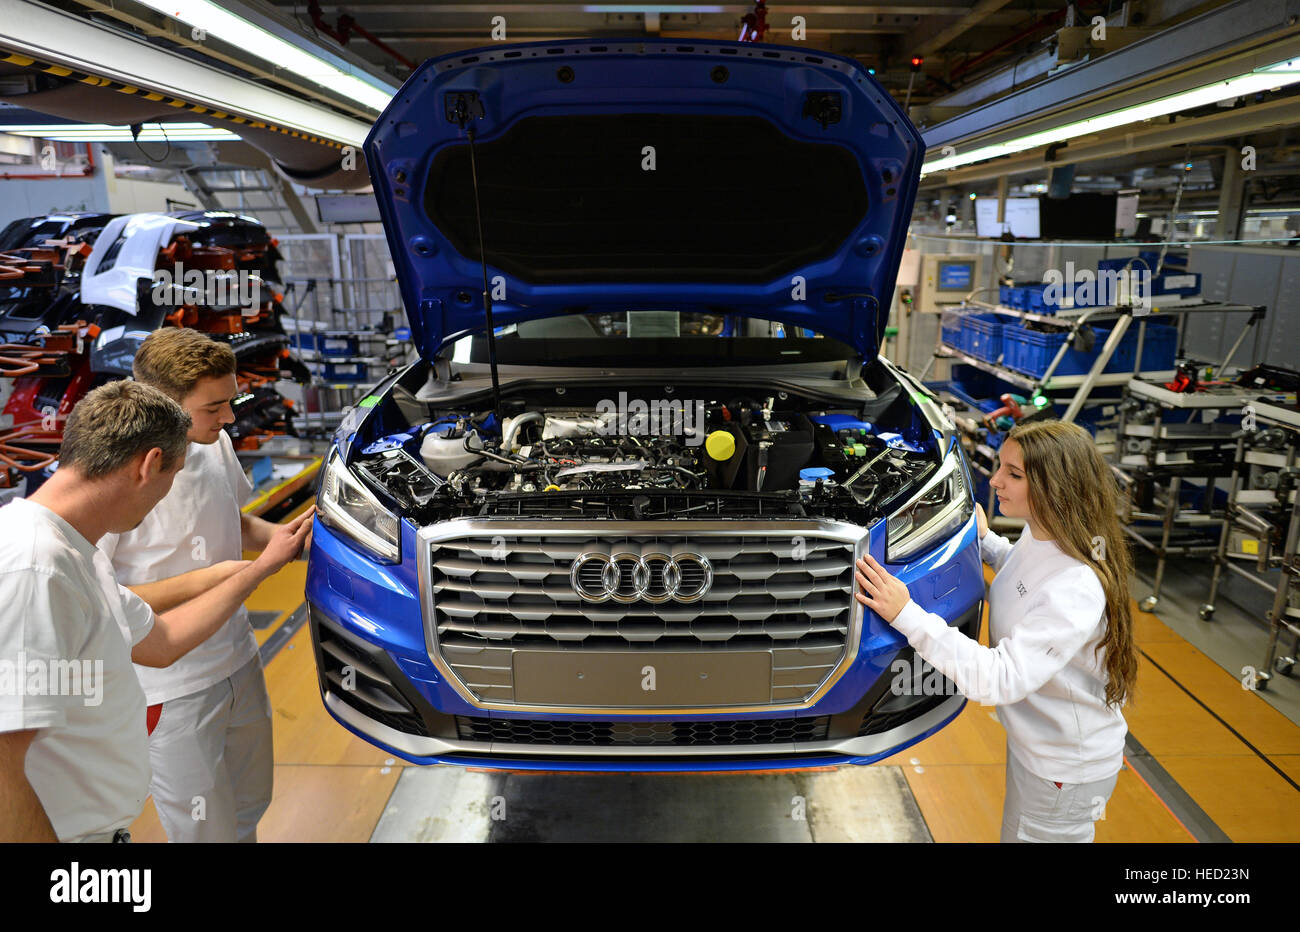 Ingolstadt, Germany. 15th Dec, 2016. Trainees David Lubojanski (3rd year production mechanic) and Dilara Ekinci (2nd year production mechanic) can be seen attaching the front end piece to an Audi on an assembly line at the Audi factory in Ingolstadt, Germany, 15 December 2016. Photo: Andreas Gebert/dpa/Alamy Live News Stock Photo